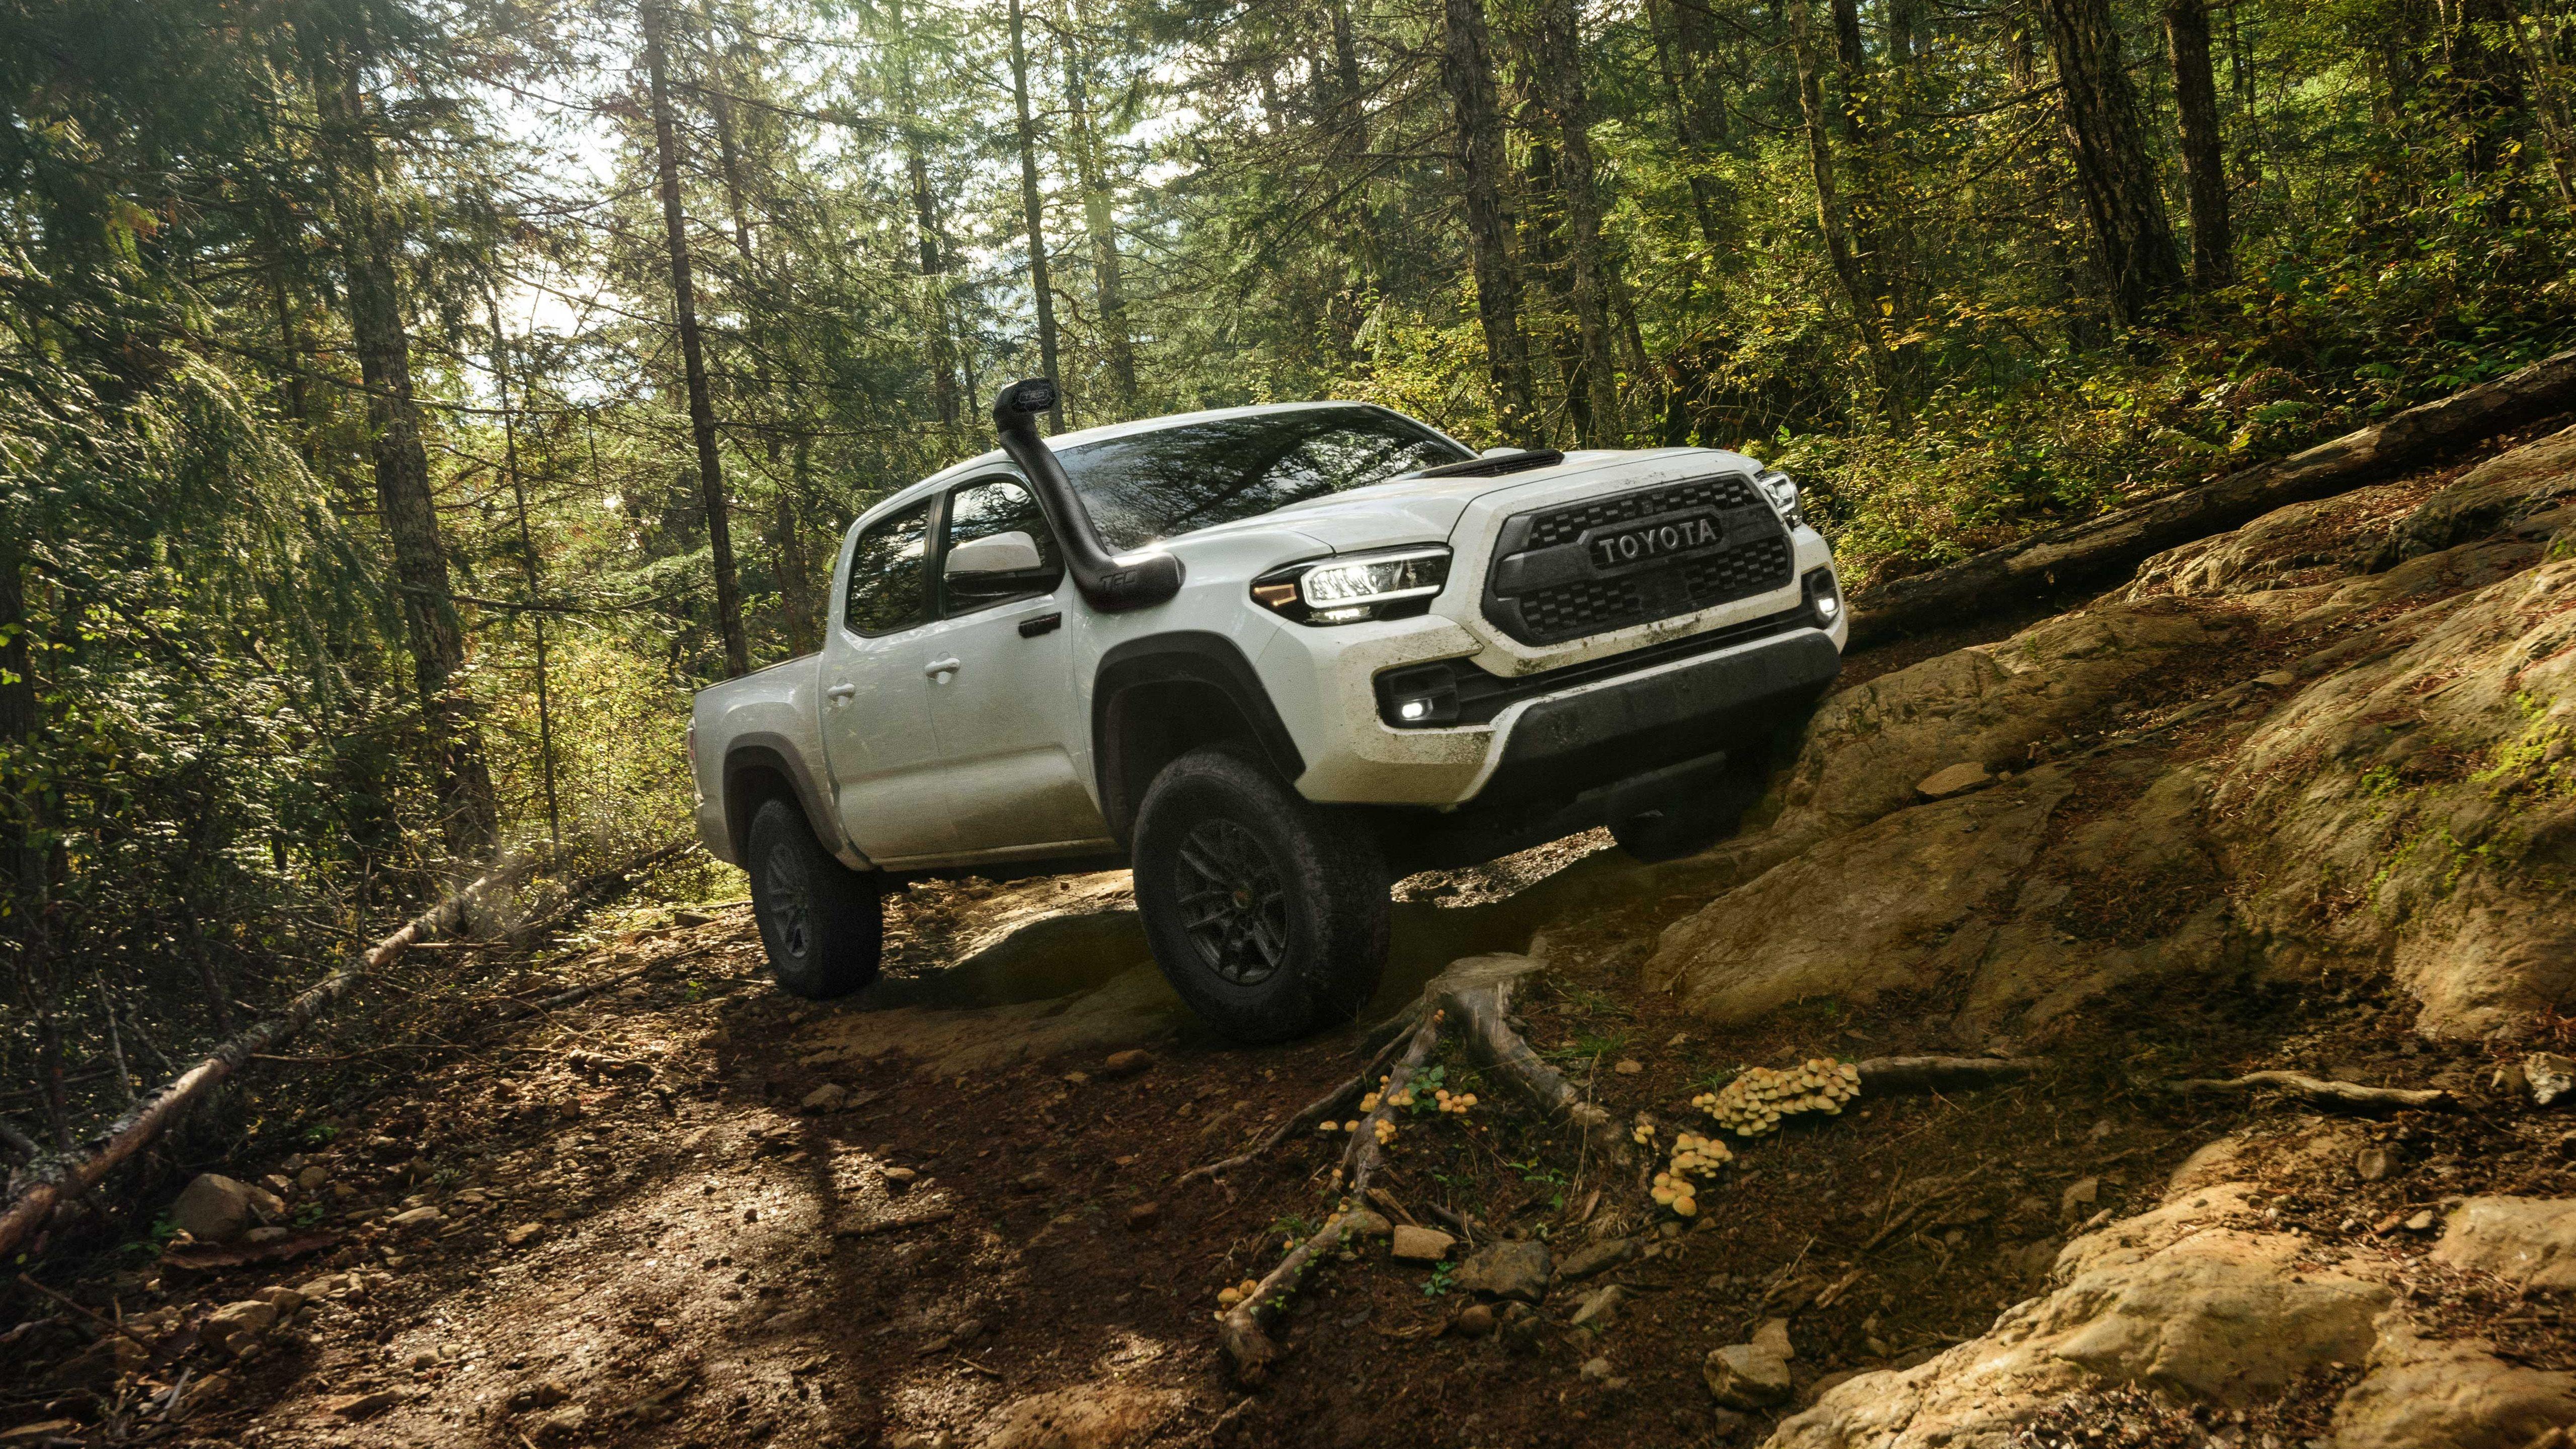 Toyota Tacoma Pictures  Download Free Images on Unsplash